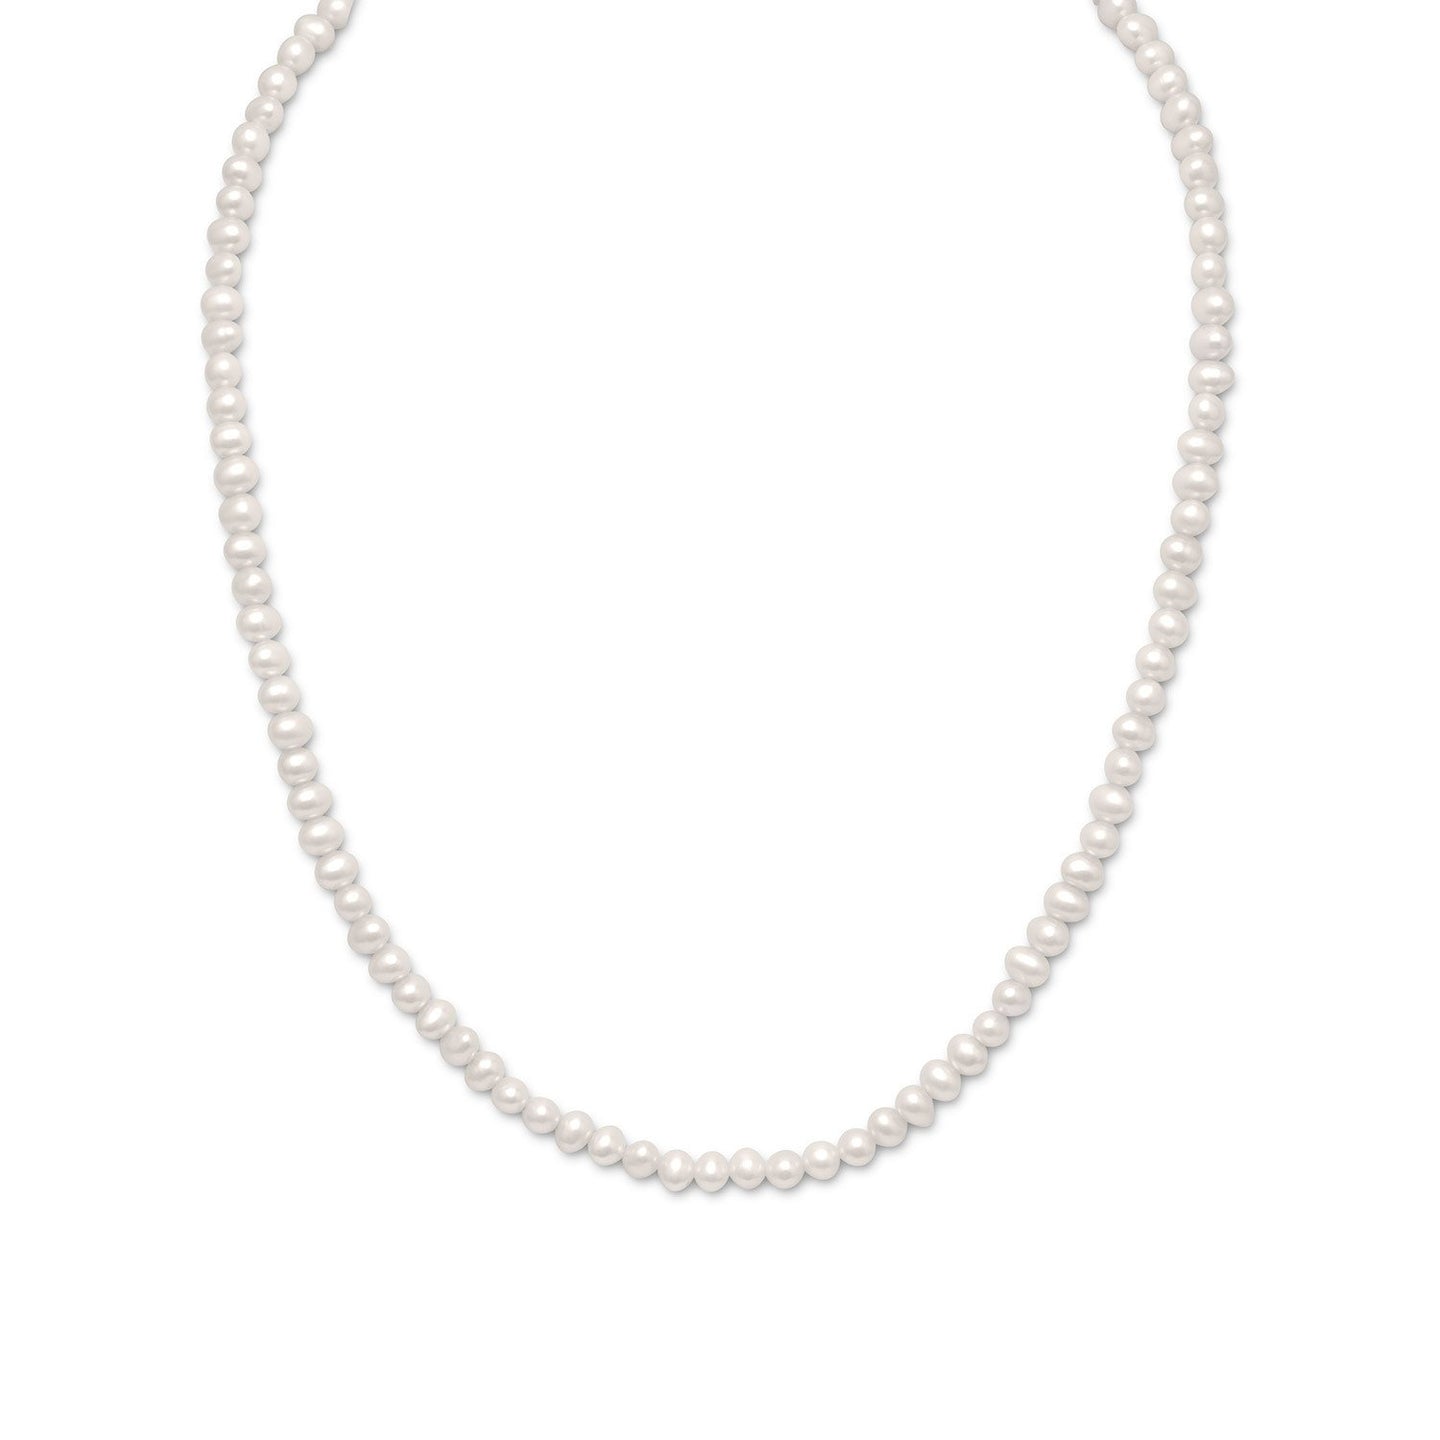 Extension White Cultured Freshwater Pearl Necklace - SoMag2